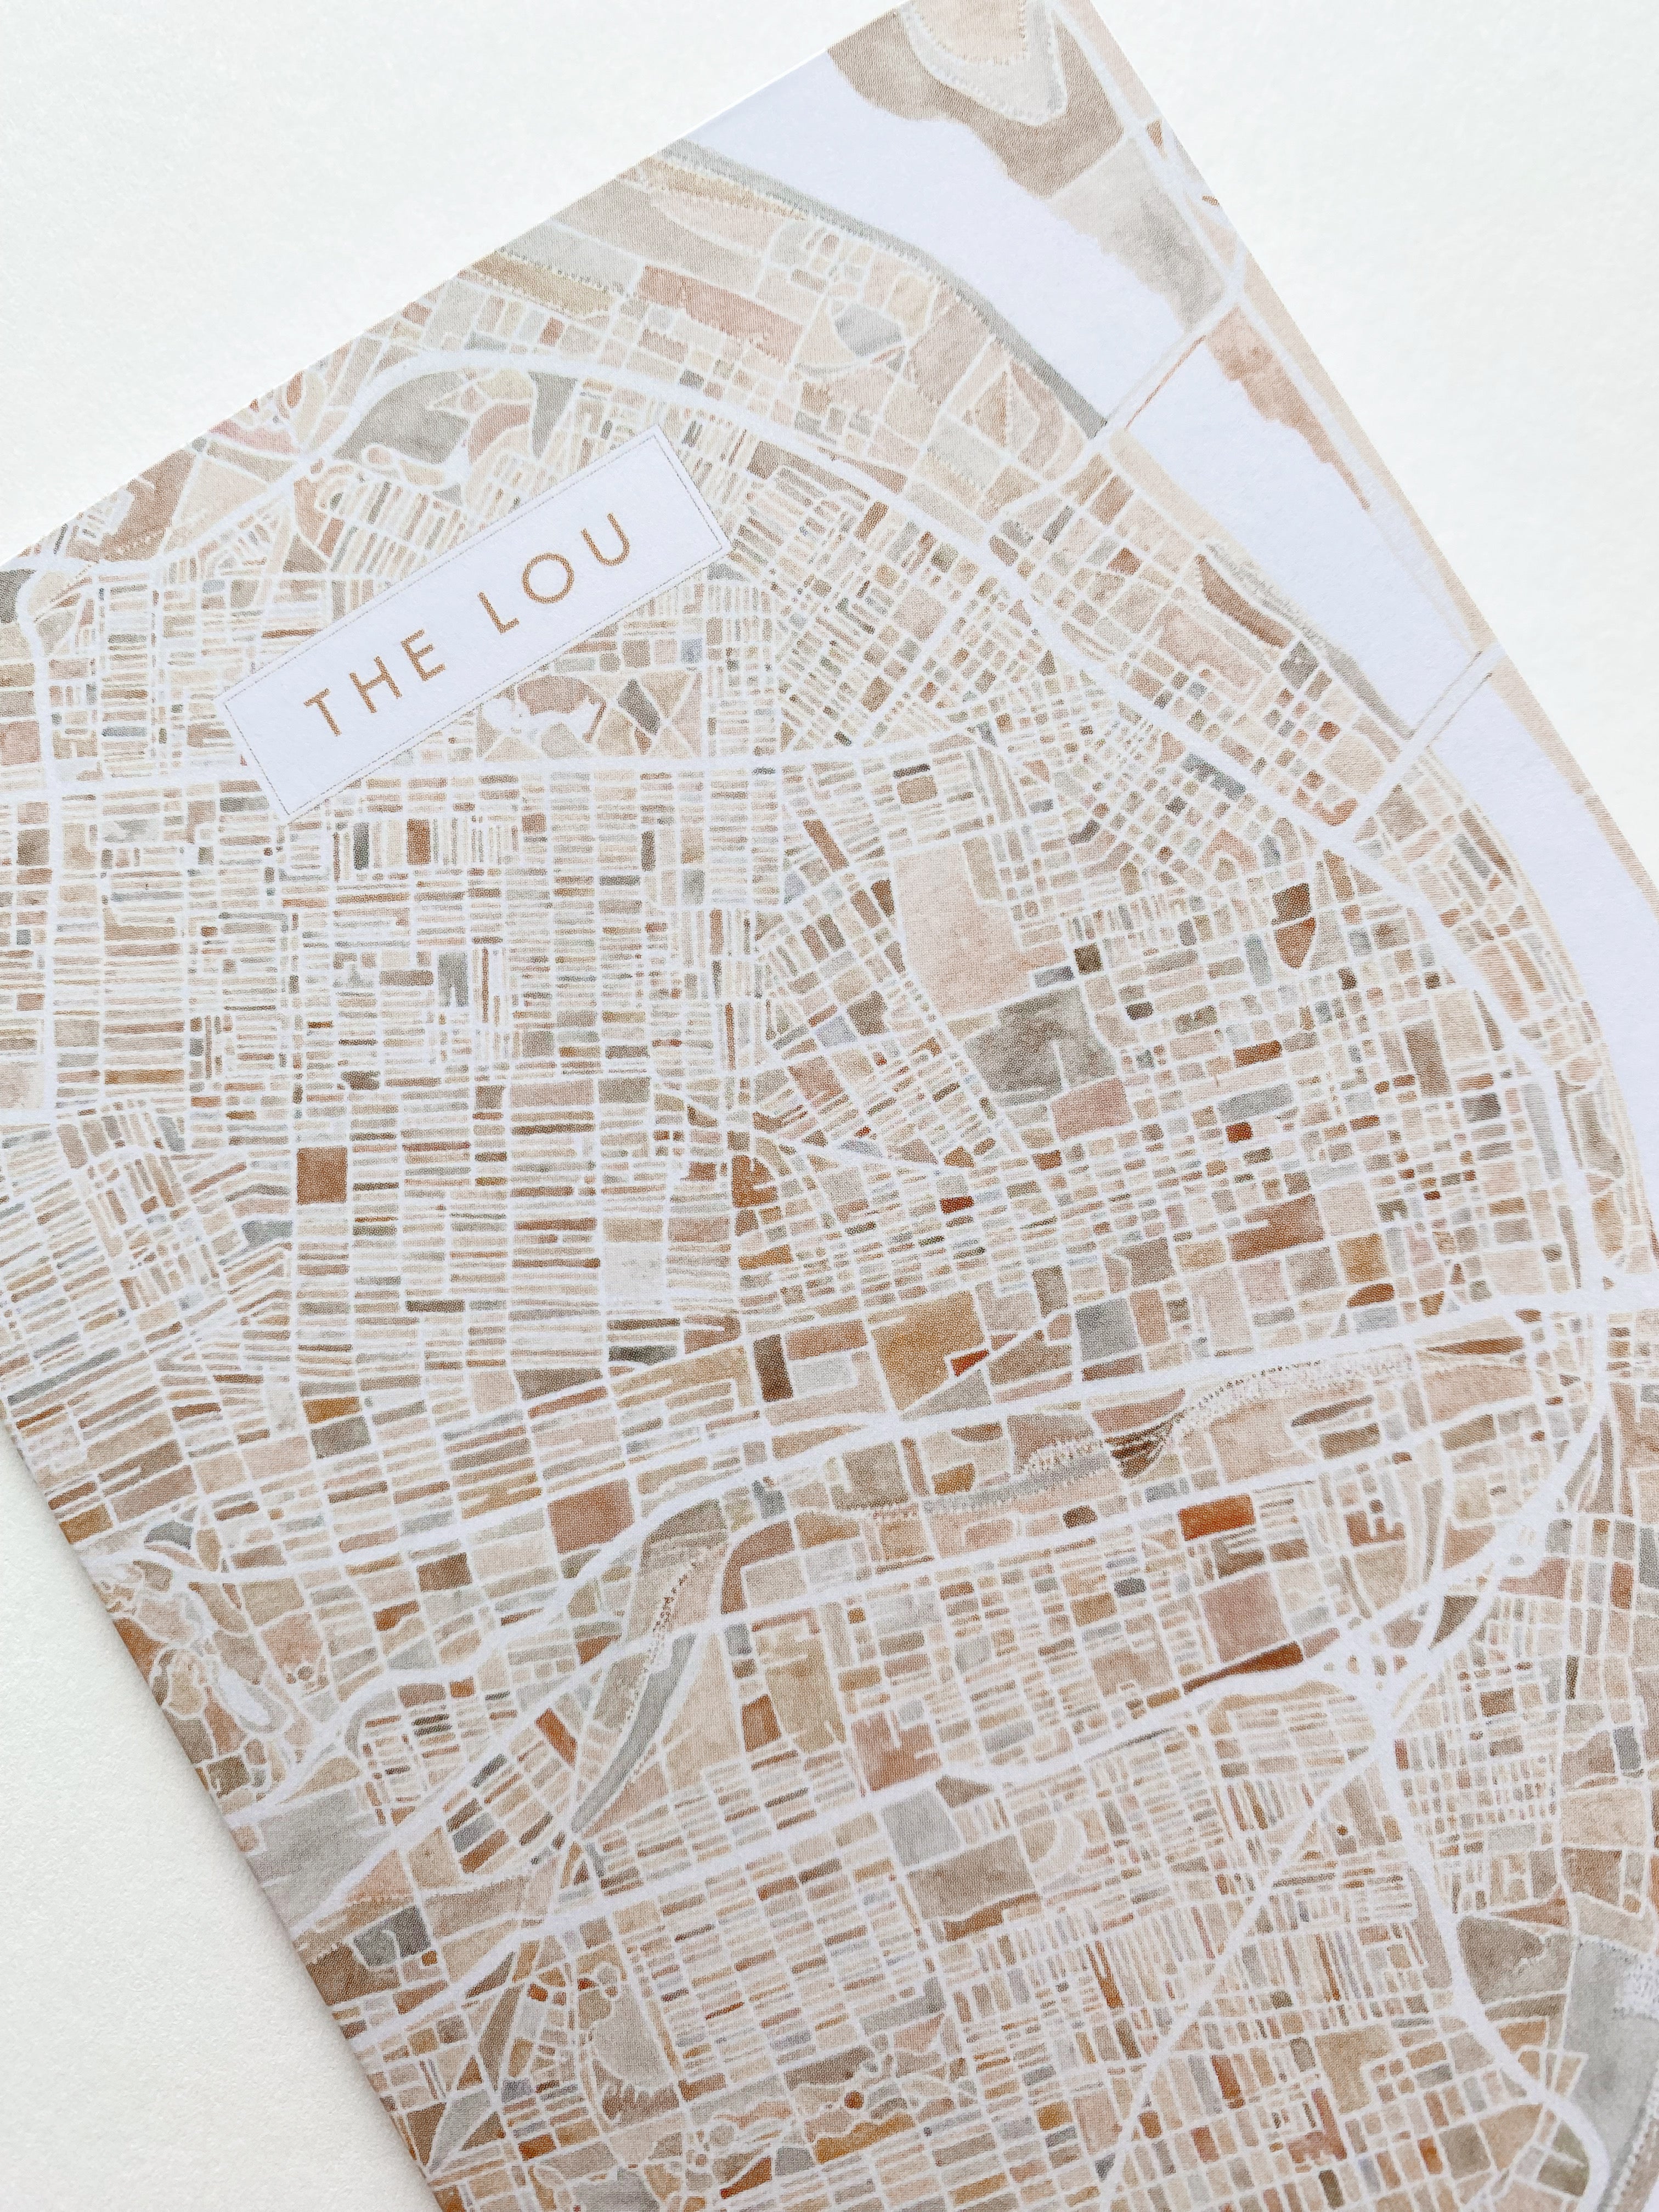 THE LOU St Louis Missouri Watercolor Map - city nickname greeting card